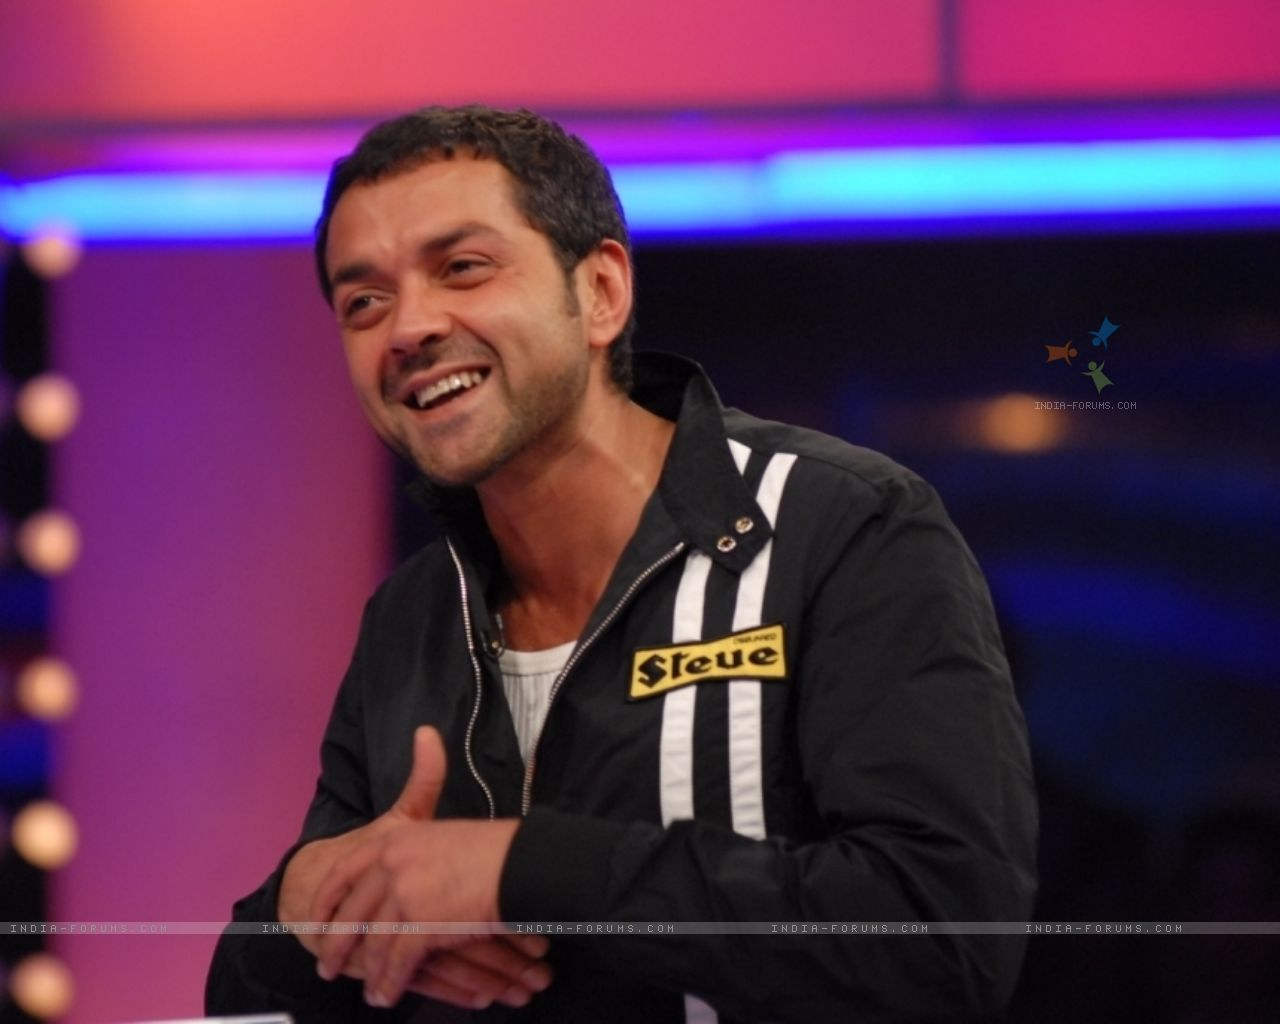 Image Of Bobby Deol